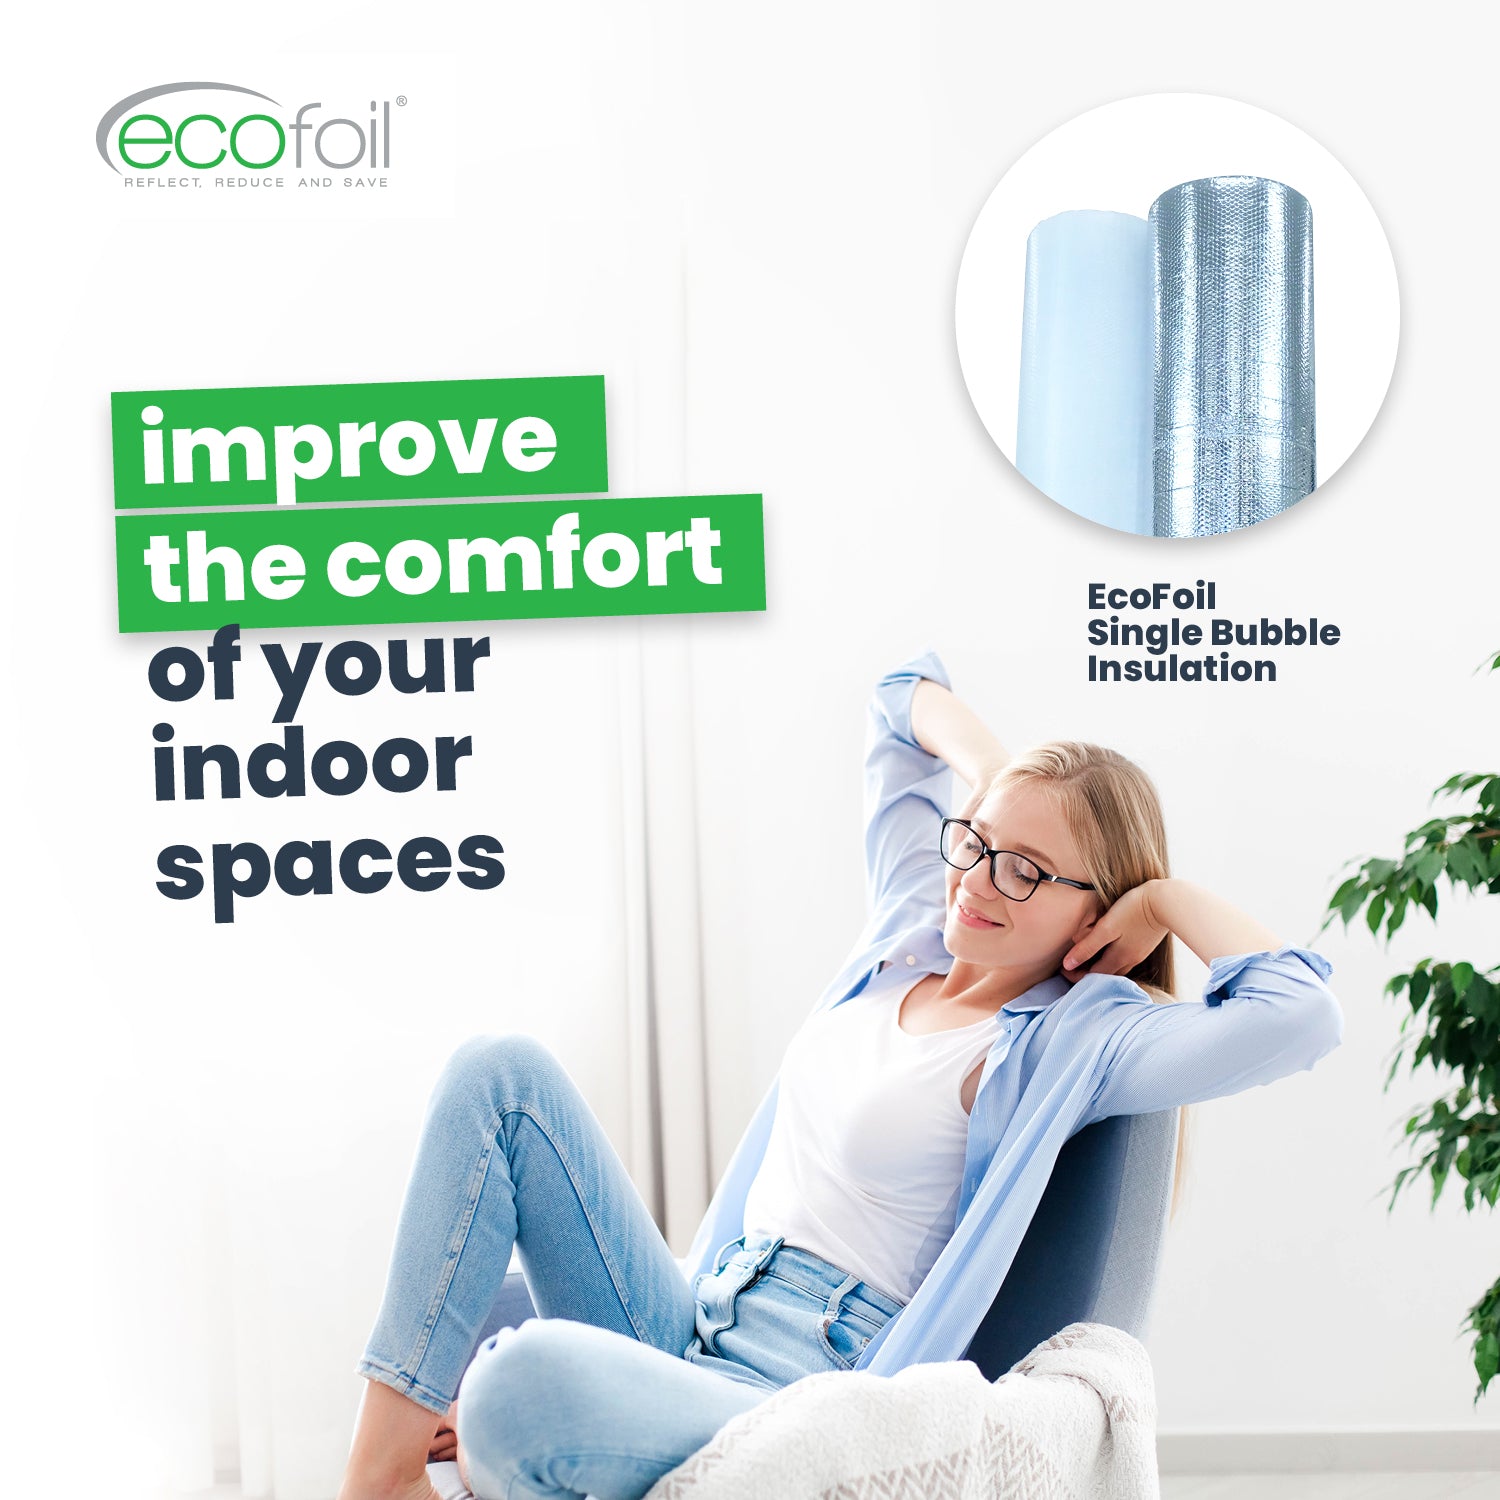 improve the comfort of indoor spaces with ecofoil single bubble insulation